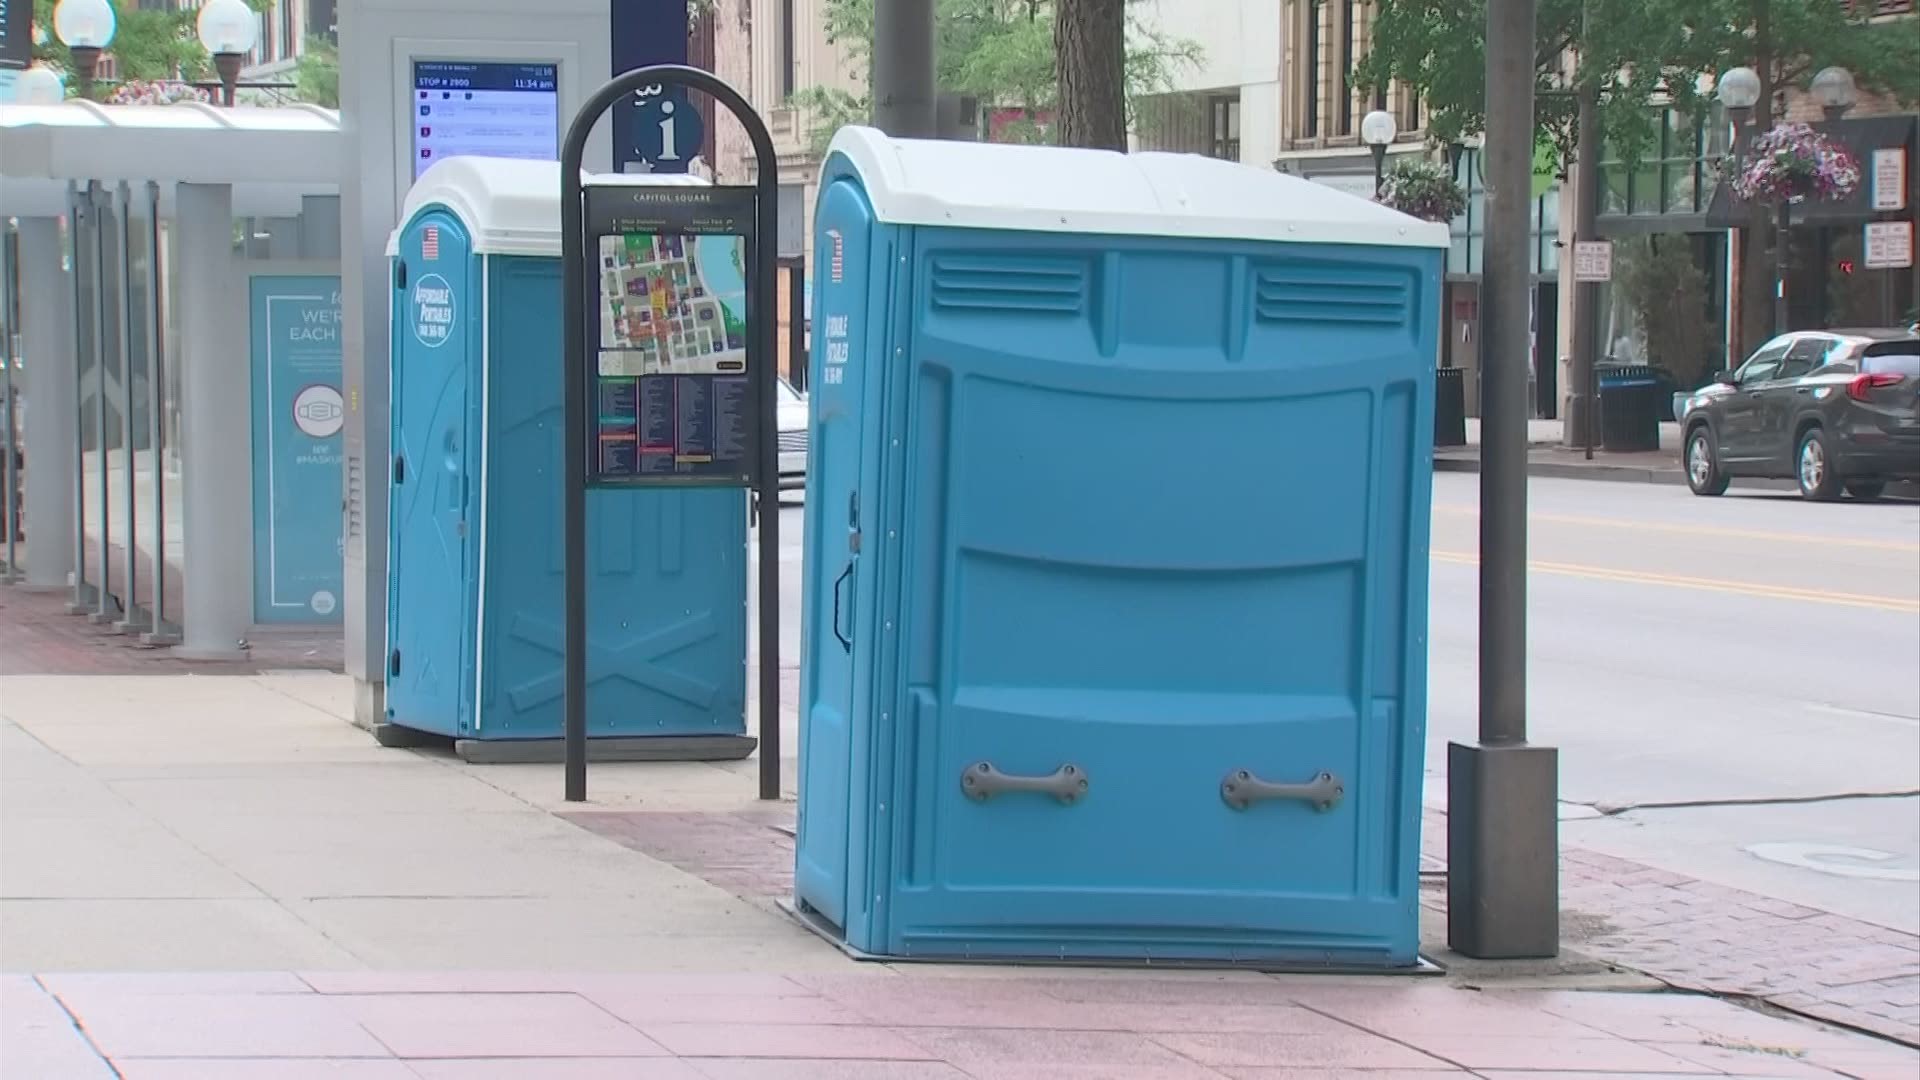 The city says not having access to public restrooms is a public health issue, especially during the pandemic.